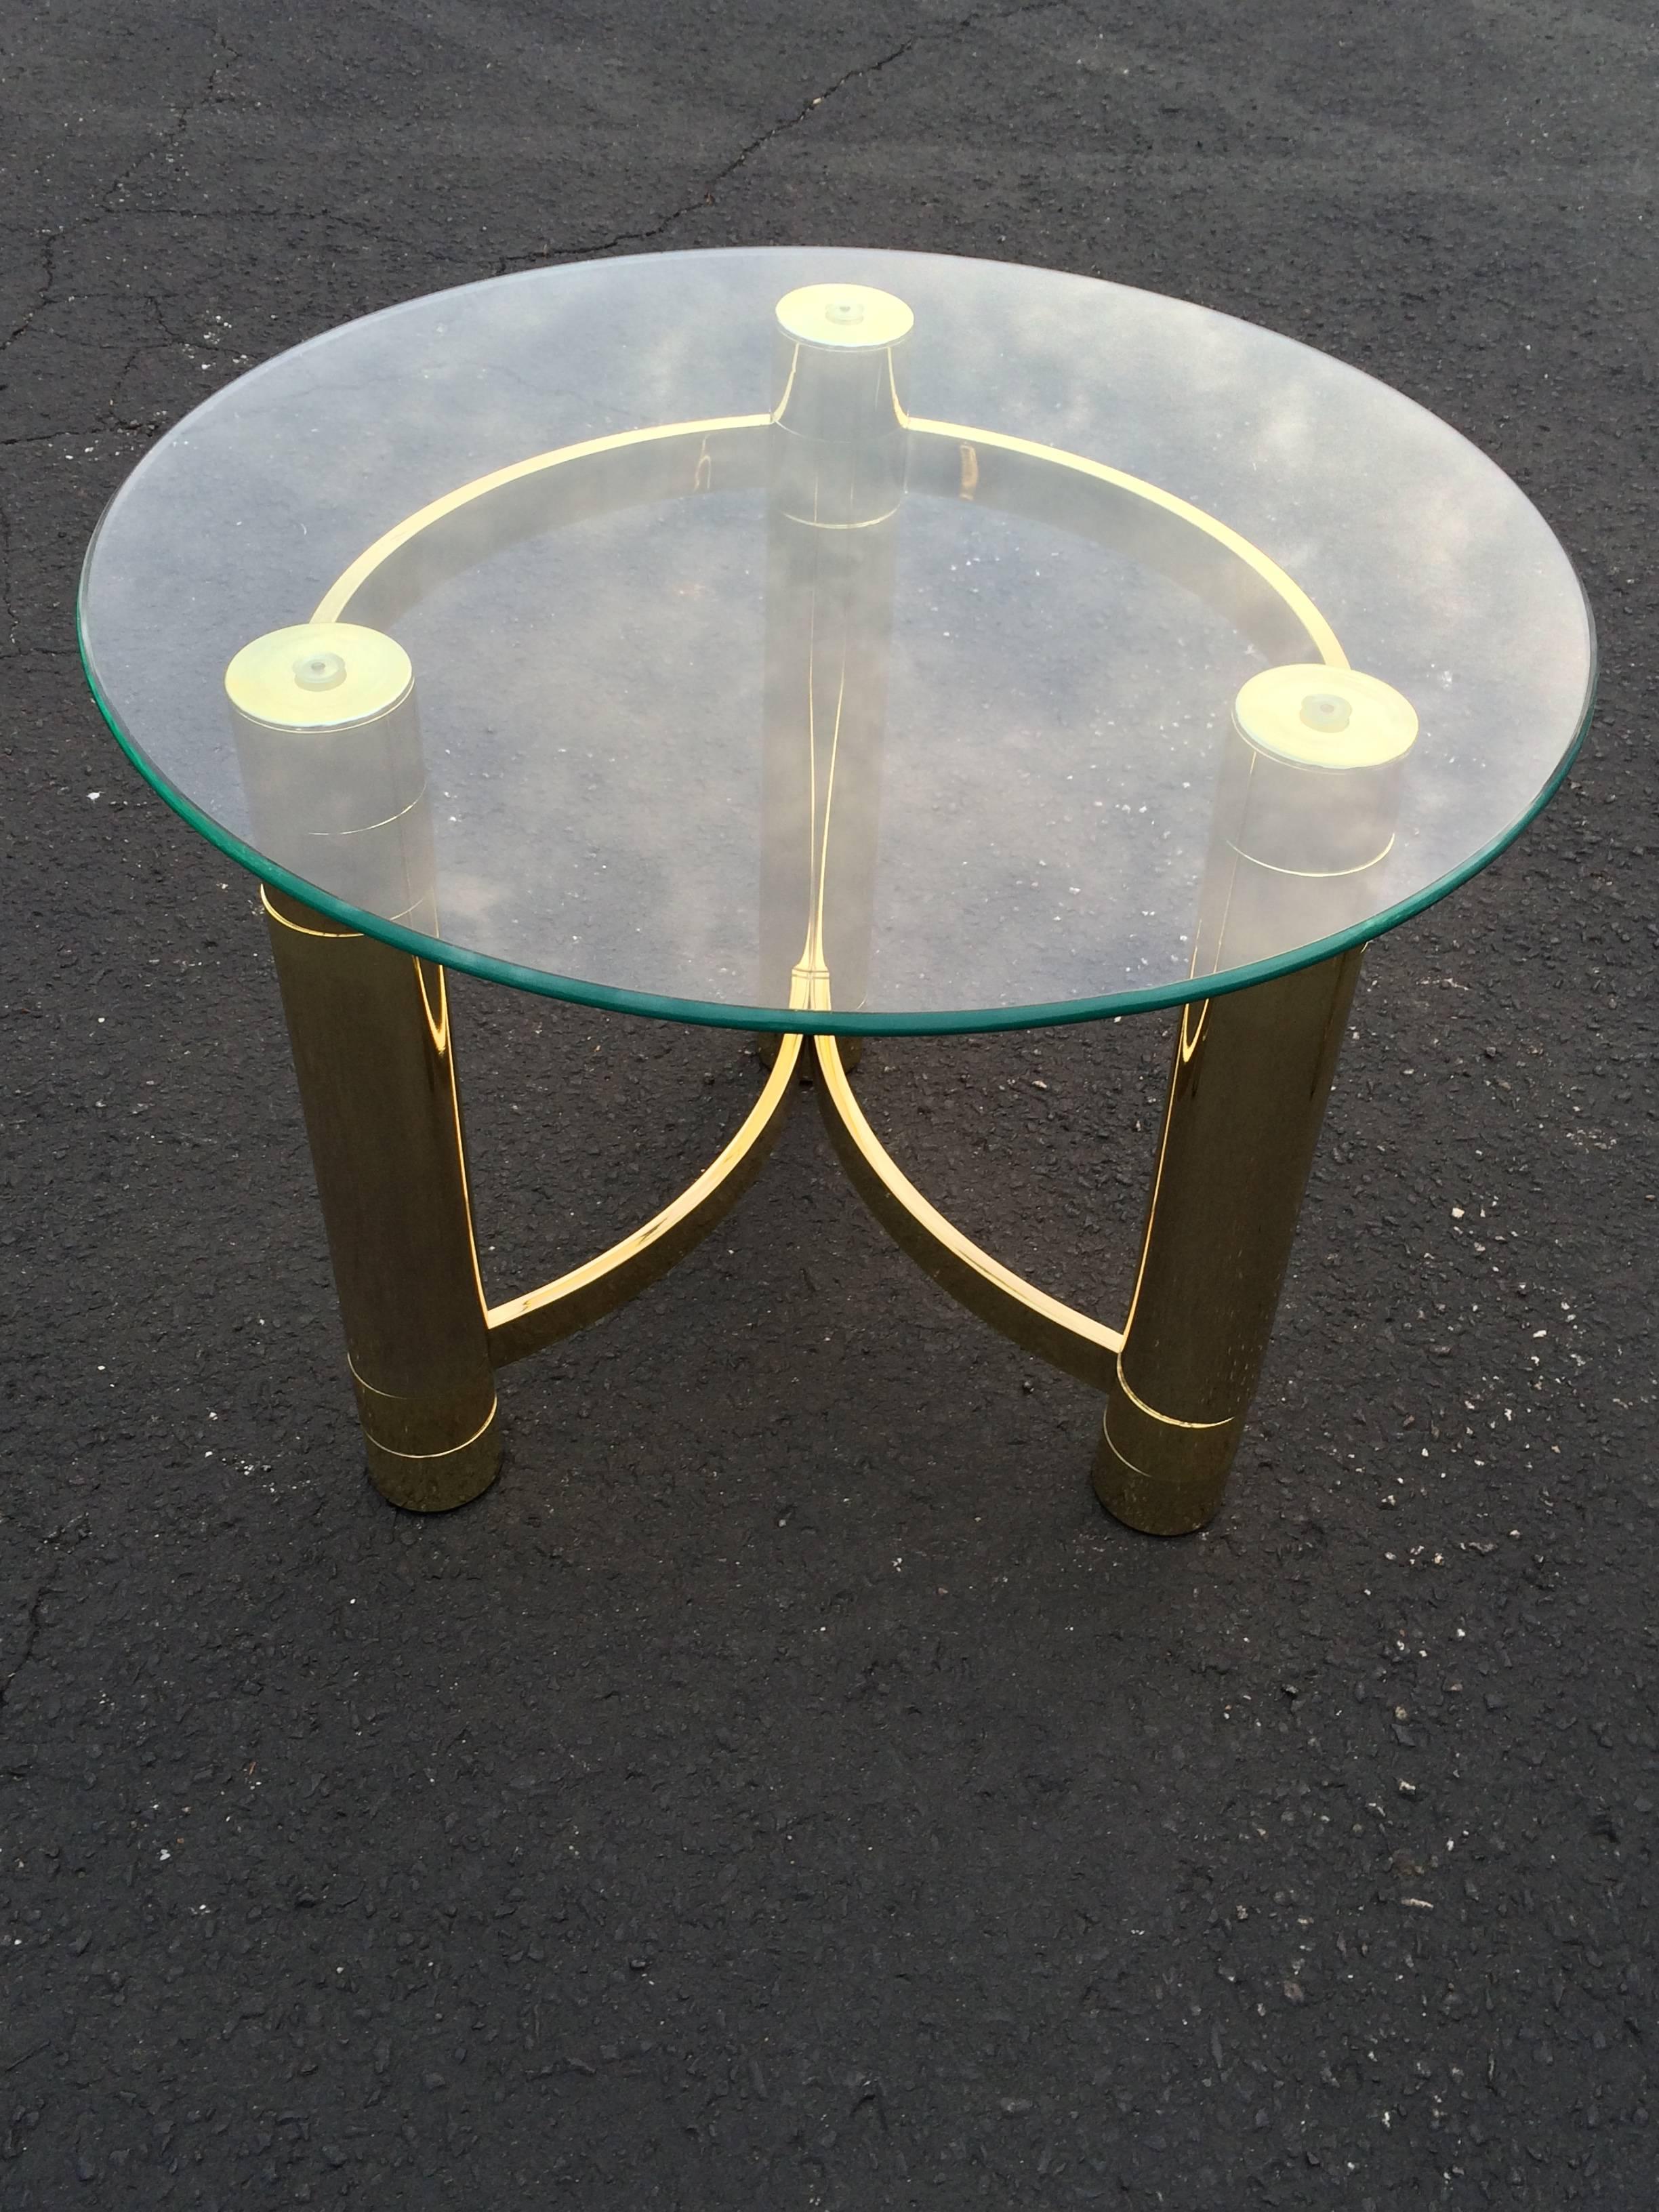 Late 20th Century Hollywood Regency Brass and Glass Side Table